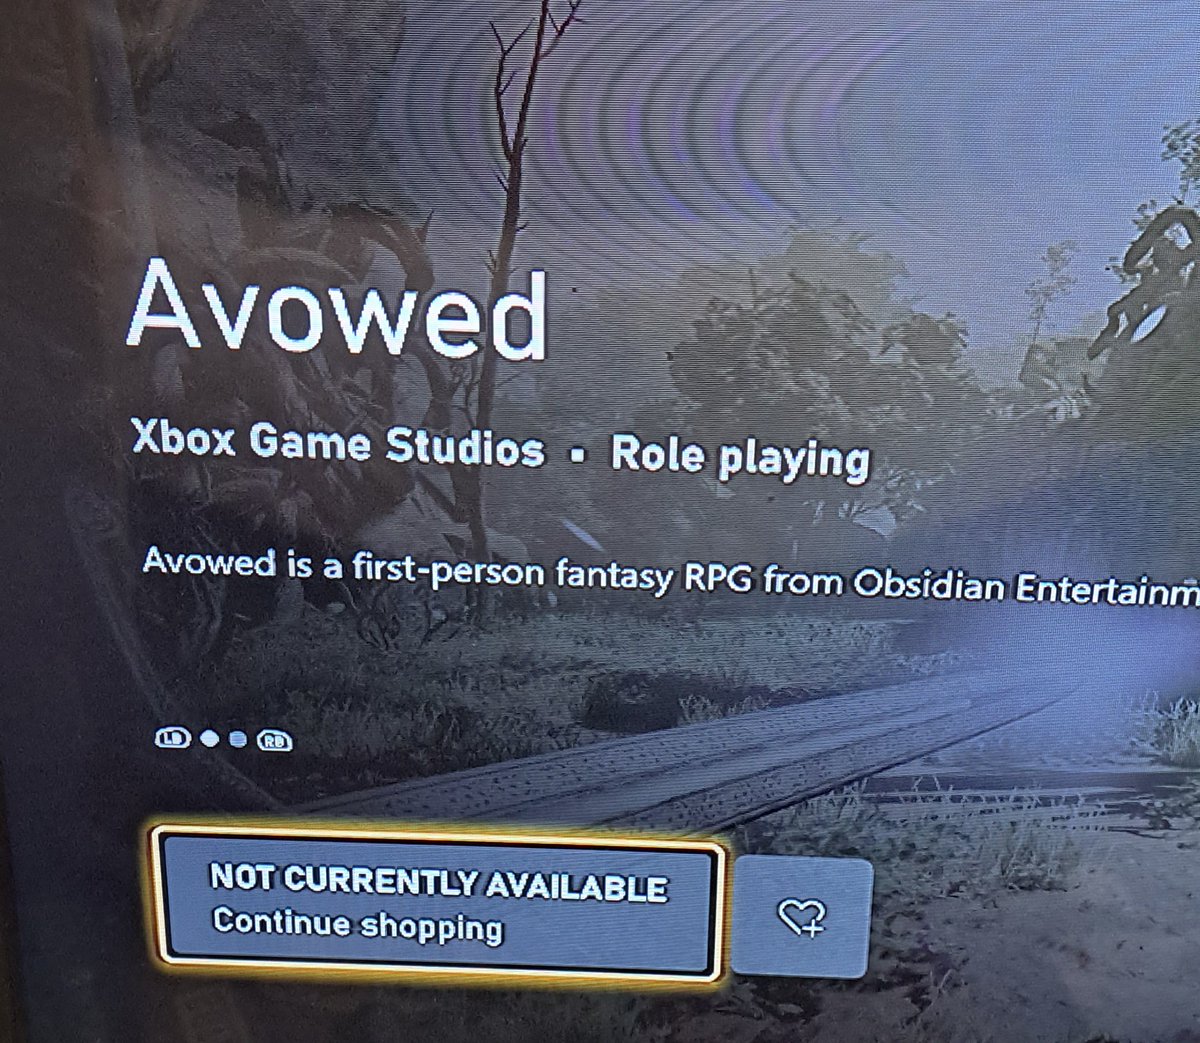 Avowed is actually up on the MS store. (Sorry for the image quality)